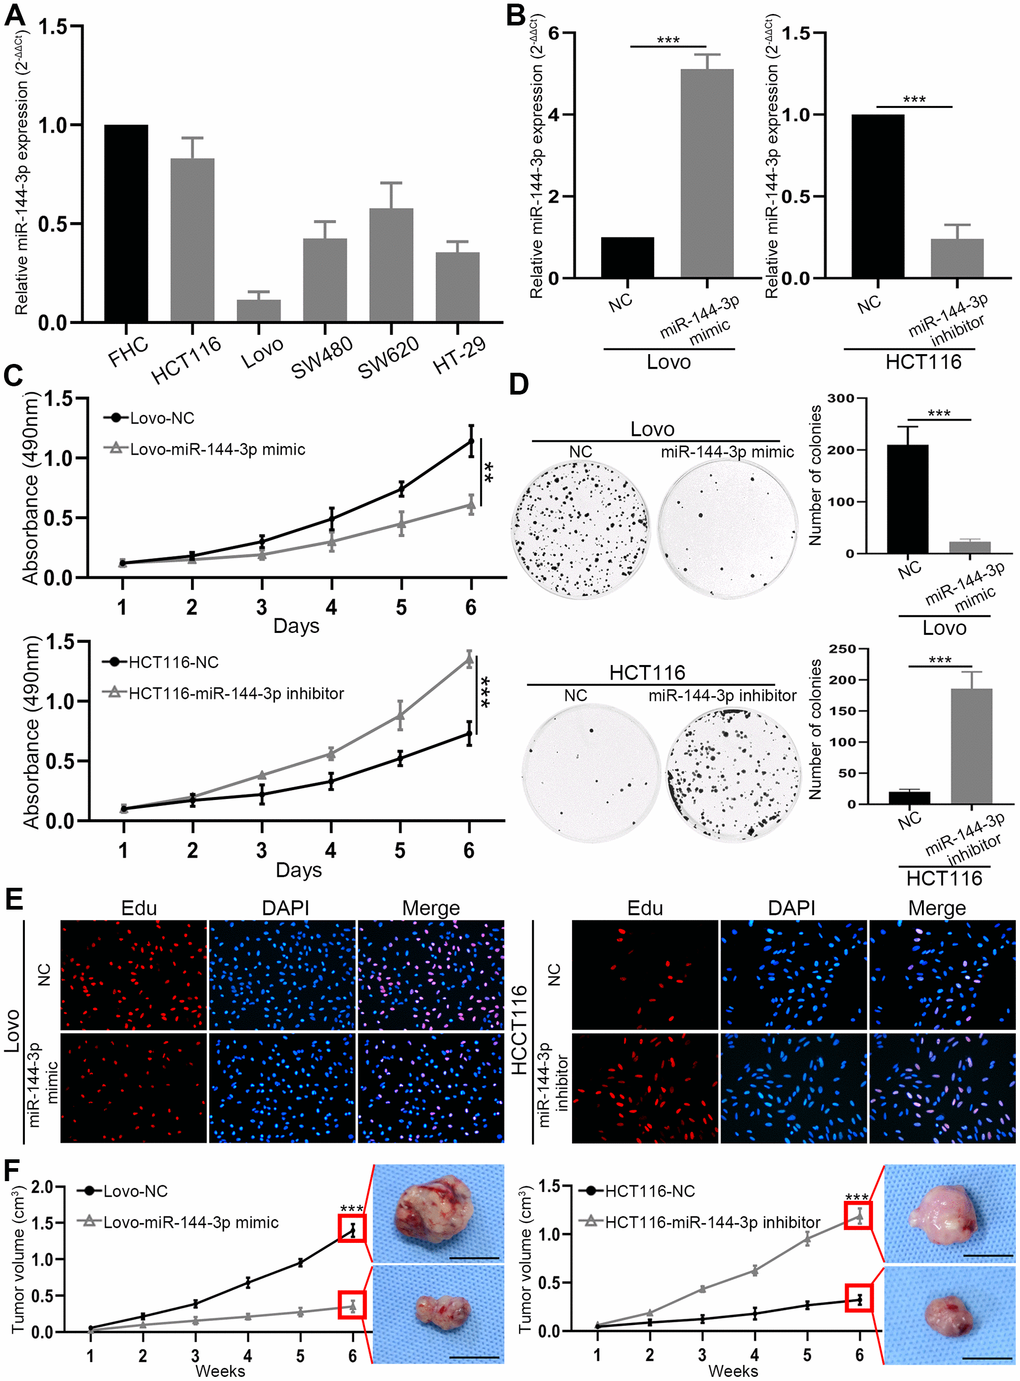 miR-144-3p was downregulated in CRA cell lines and inhibited CRA cell proliferation and growth. (A) miR-144-3p expression was downregulated in CRA cells lines HCT116, Lovo, SW480, SW620, HT-29 compared to normal colorectal mucosal cell line FHC. (B) qRT-PCR was performed to verify the efficiency of overexpression in Lovo cells transfected with miR-144-3p mimic and knockdown in HCT116 cells transfected with miR-144-3p inhibitor. (C) MTT assay of Lovo and HCT116 cell proliferation. (D) Colony formation assay of Lovo and HCT116 cells. (E) Edu assay of the proliferation ability of Lovo cells transfected with miR-144-3p mimic and HCT116 cells transfected with miR-144-3p inhibitor. (F) The growth curve showed the change of the volume of subcutaneous tumors from indicated CRA cells and the representative images of subcutaneous tumors harvested 6 weeks after CRA cell inoculation in the right panel. Scale bar: 1cm. NC, normal control. **, PP 